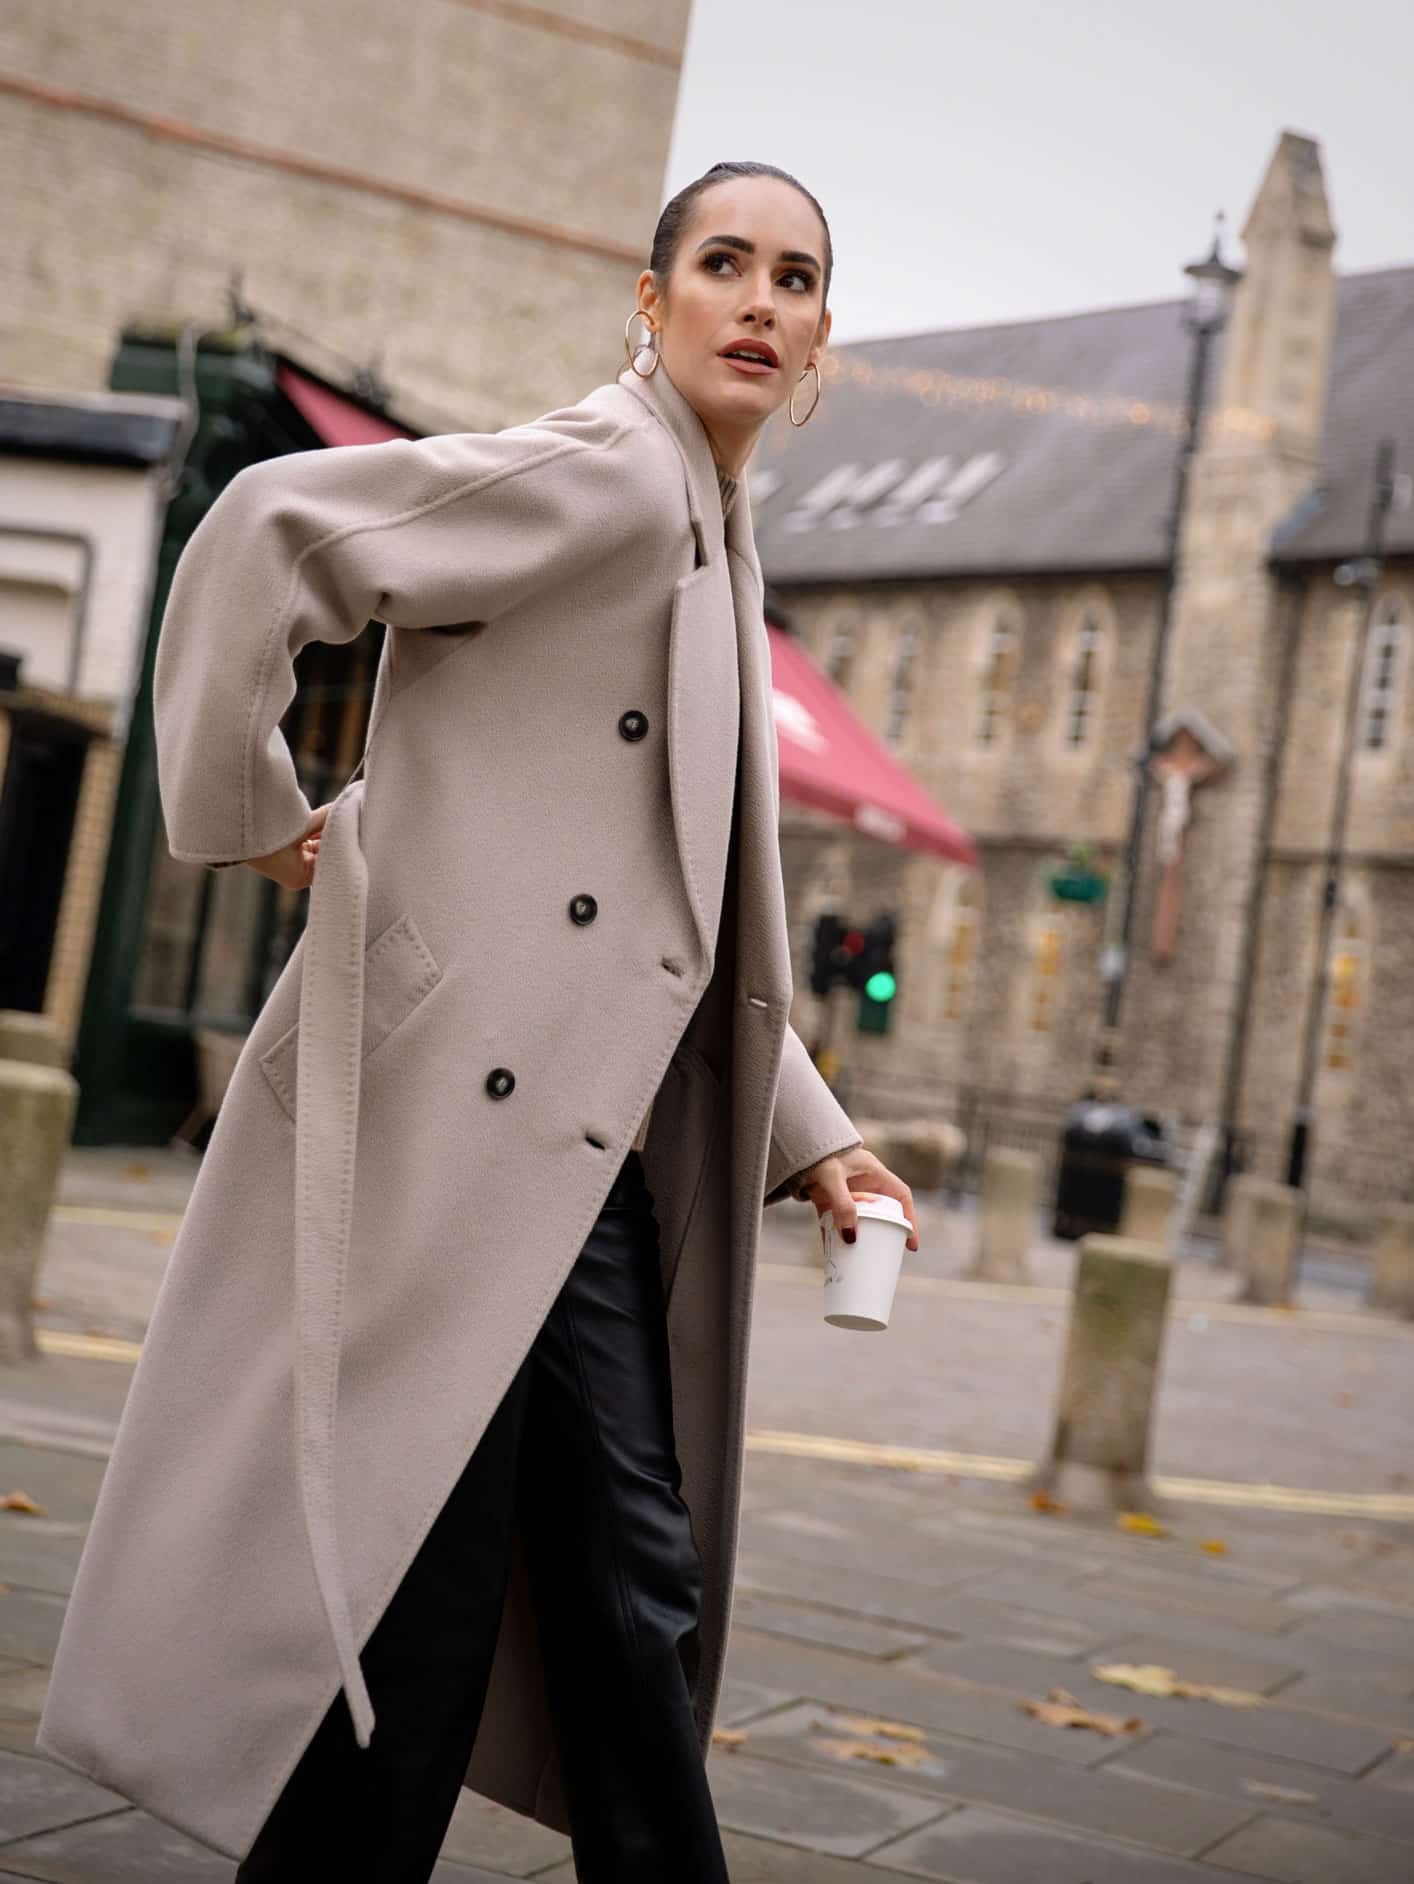 Winter Coats You Need In Your Wardrobe